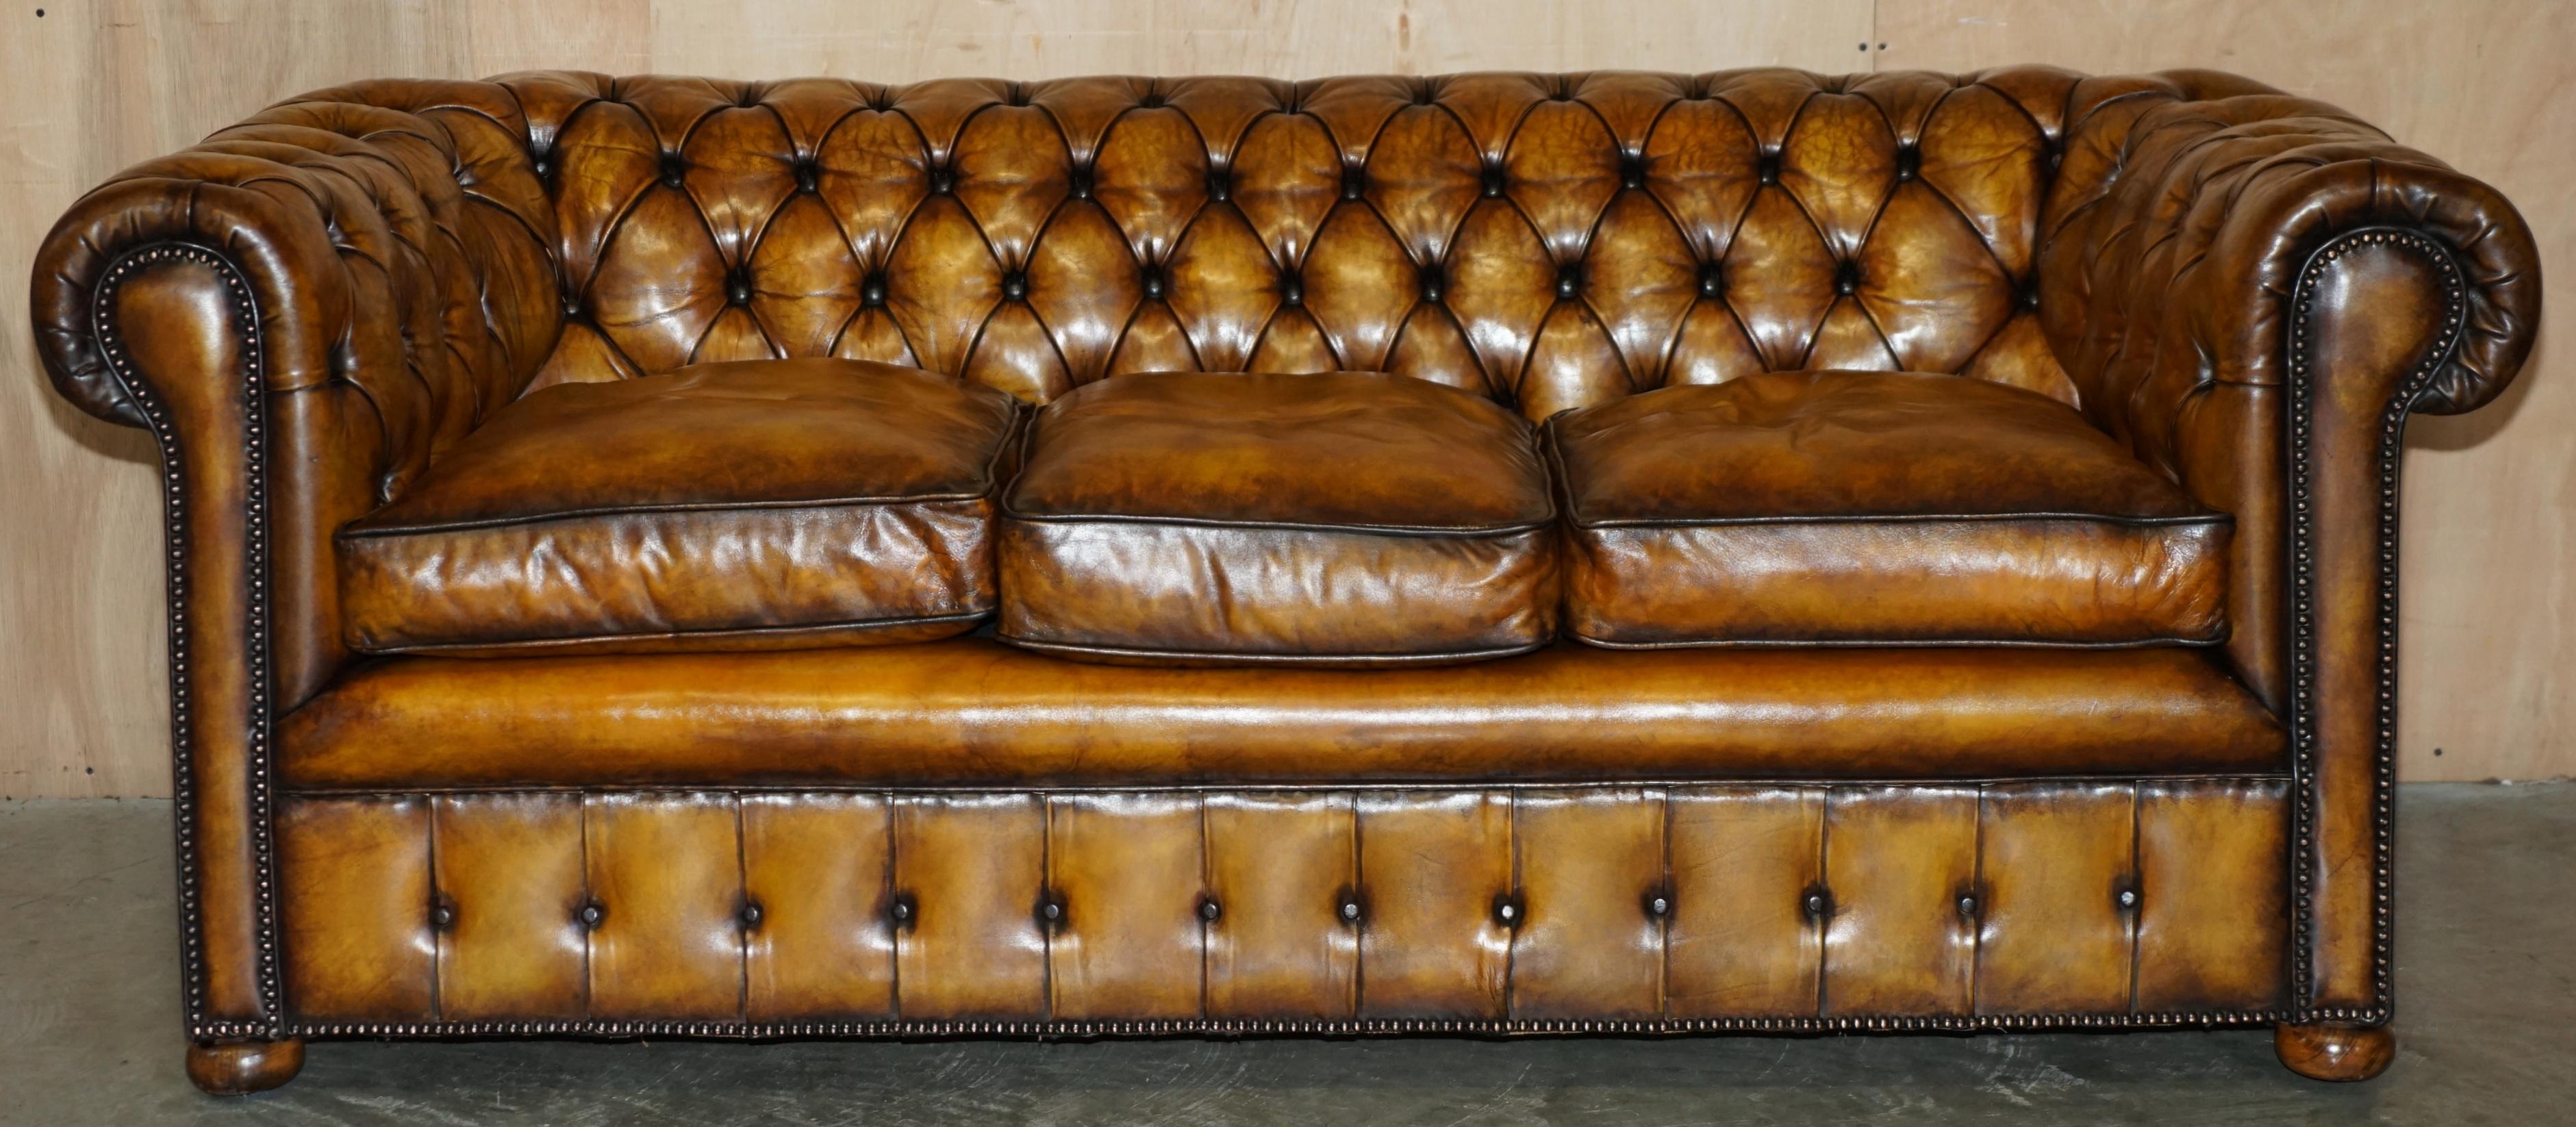 Royal House Antiques

Royal House Antiques is delighted to offer for sale this super rare, highly collectable circa 1940's fully restored Chesterfield sofa which is part of a set

Please note the delivery fee listed is just a guide, it covers within